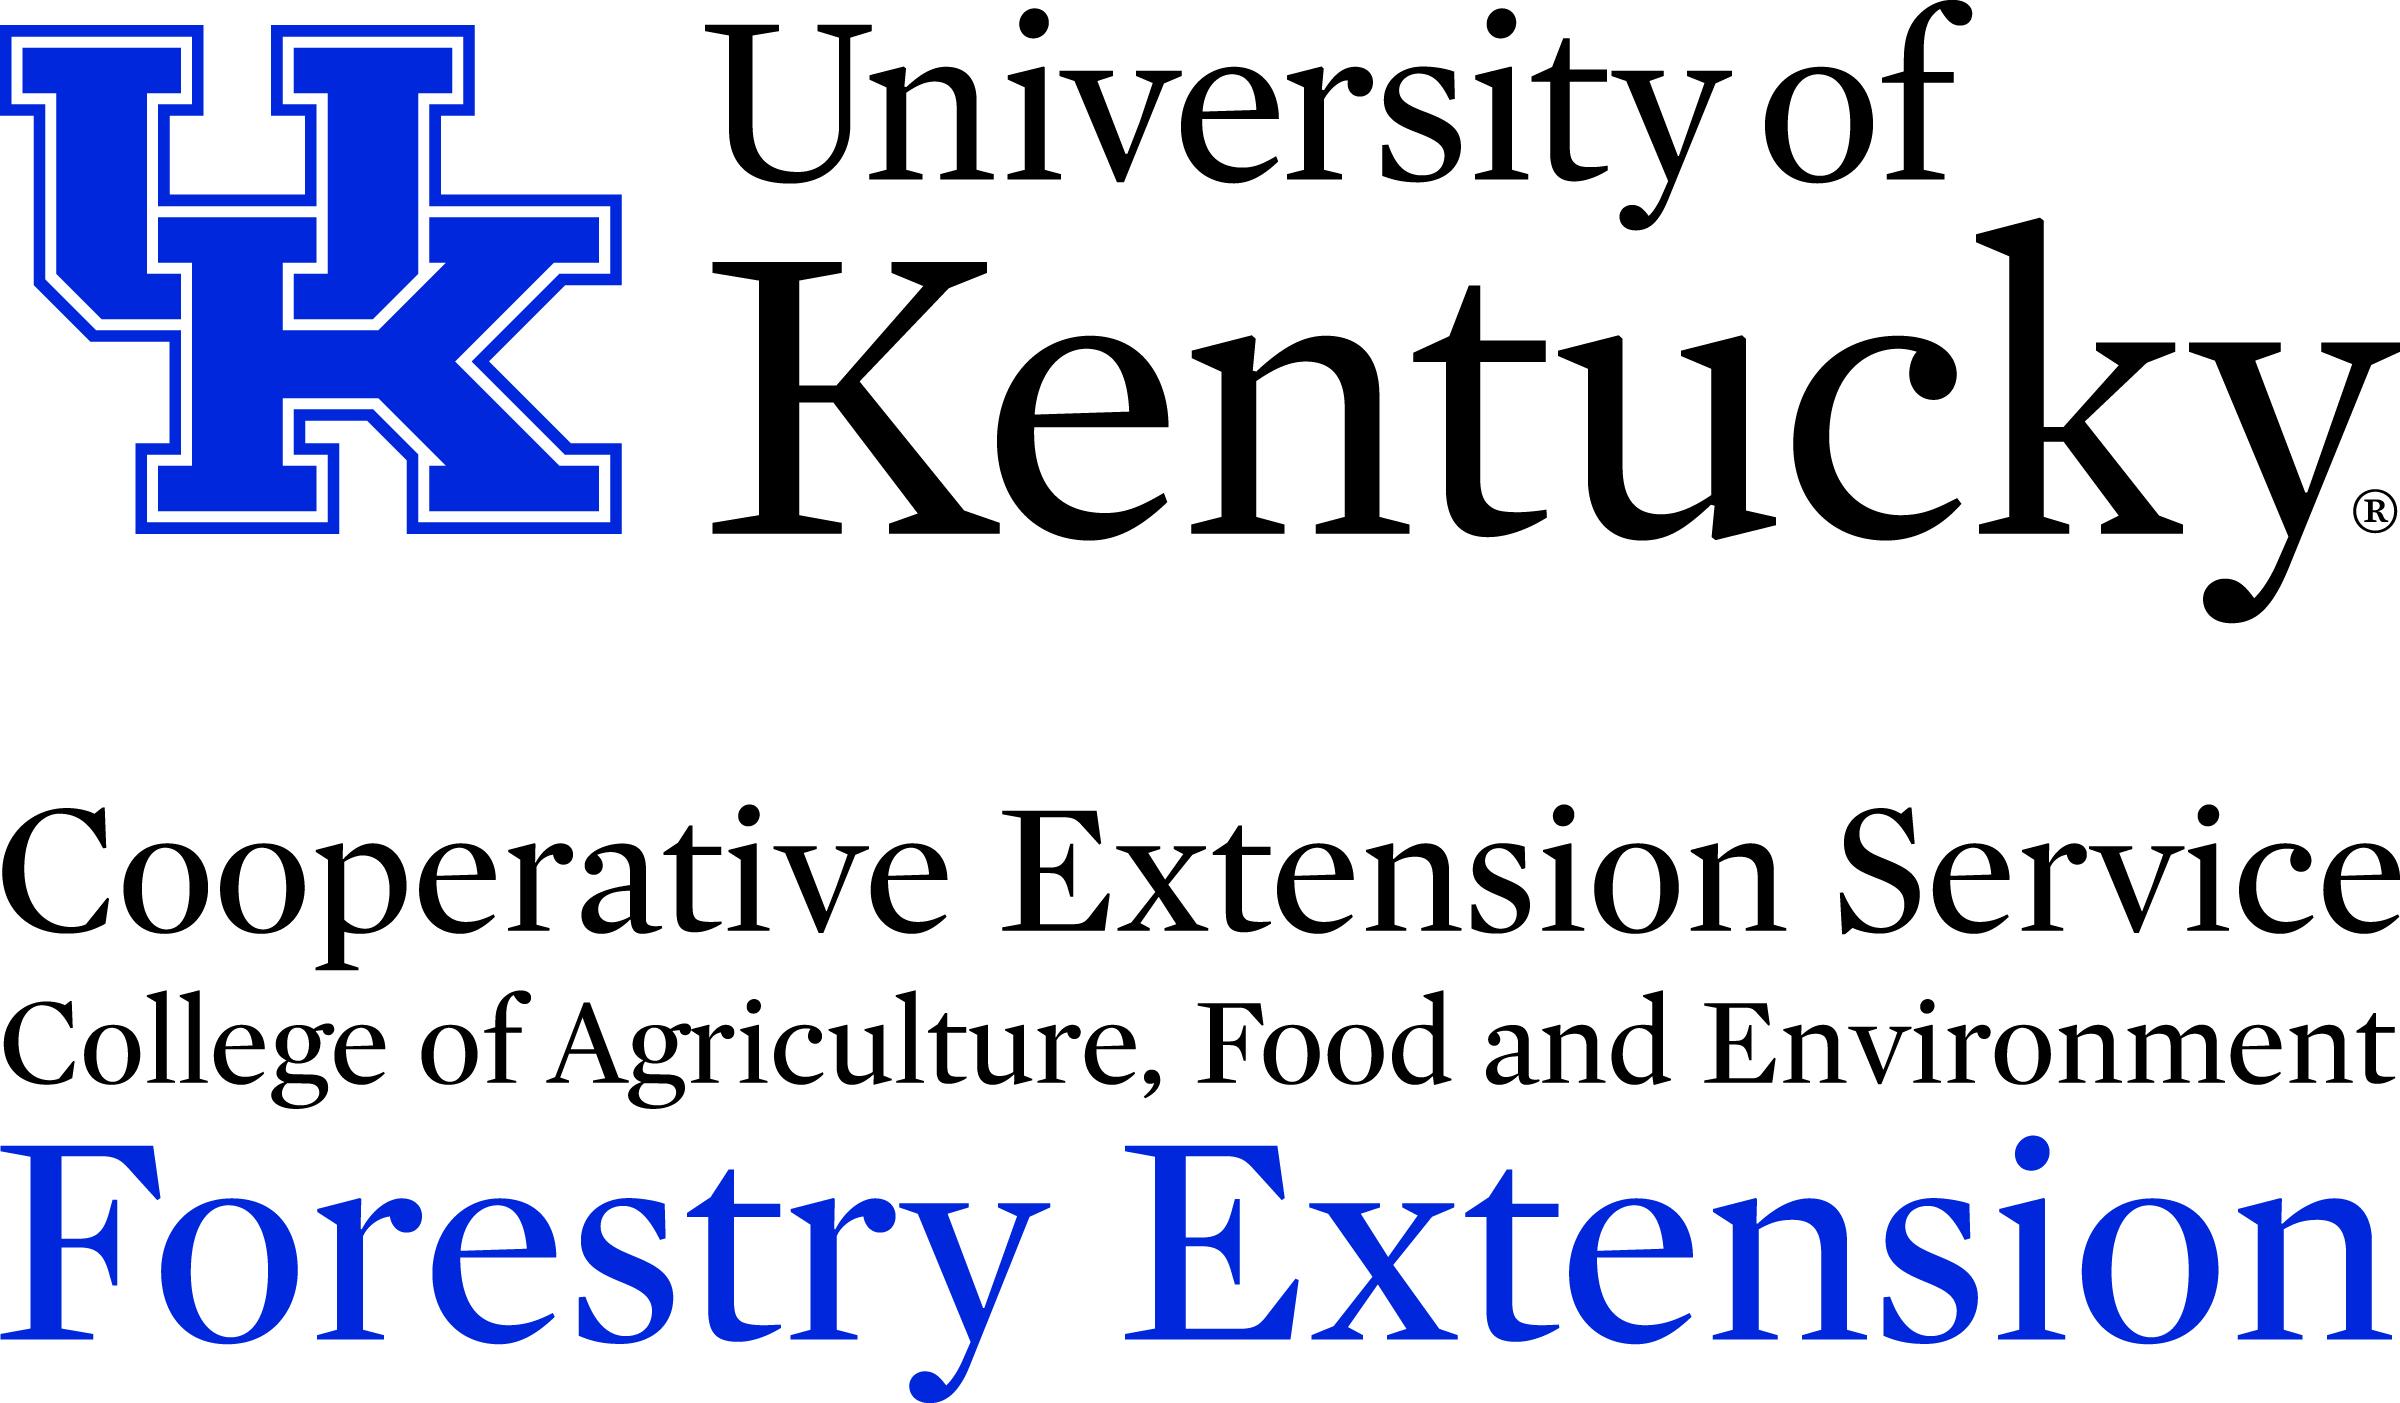 UK Forestry Extension Logo